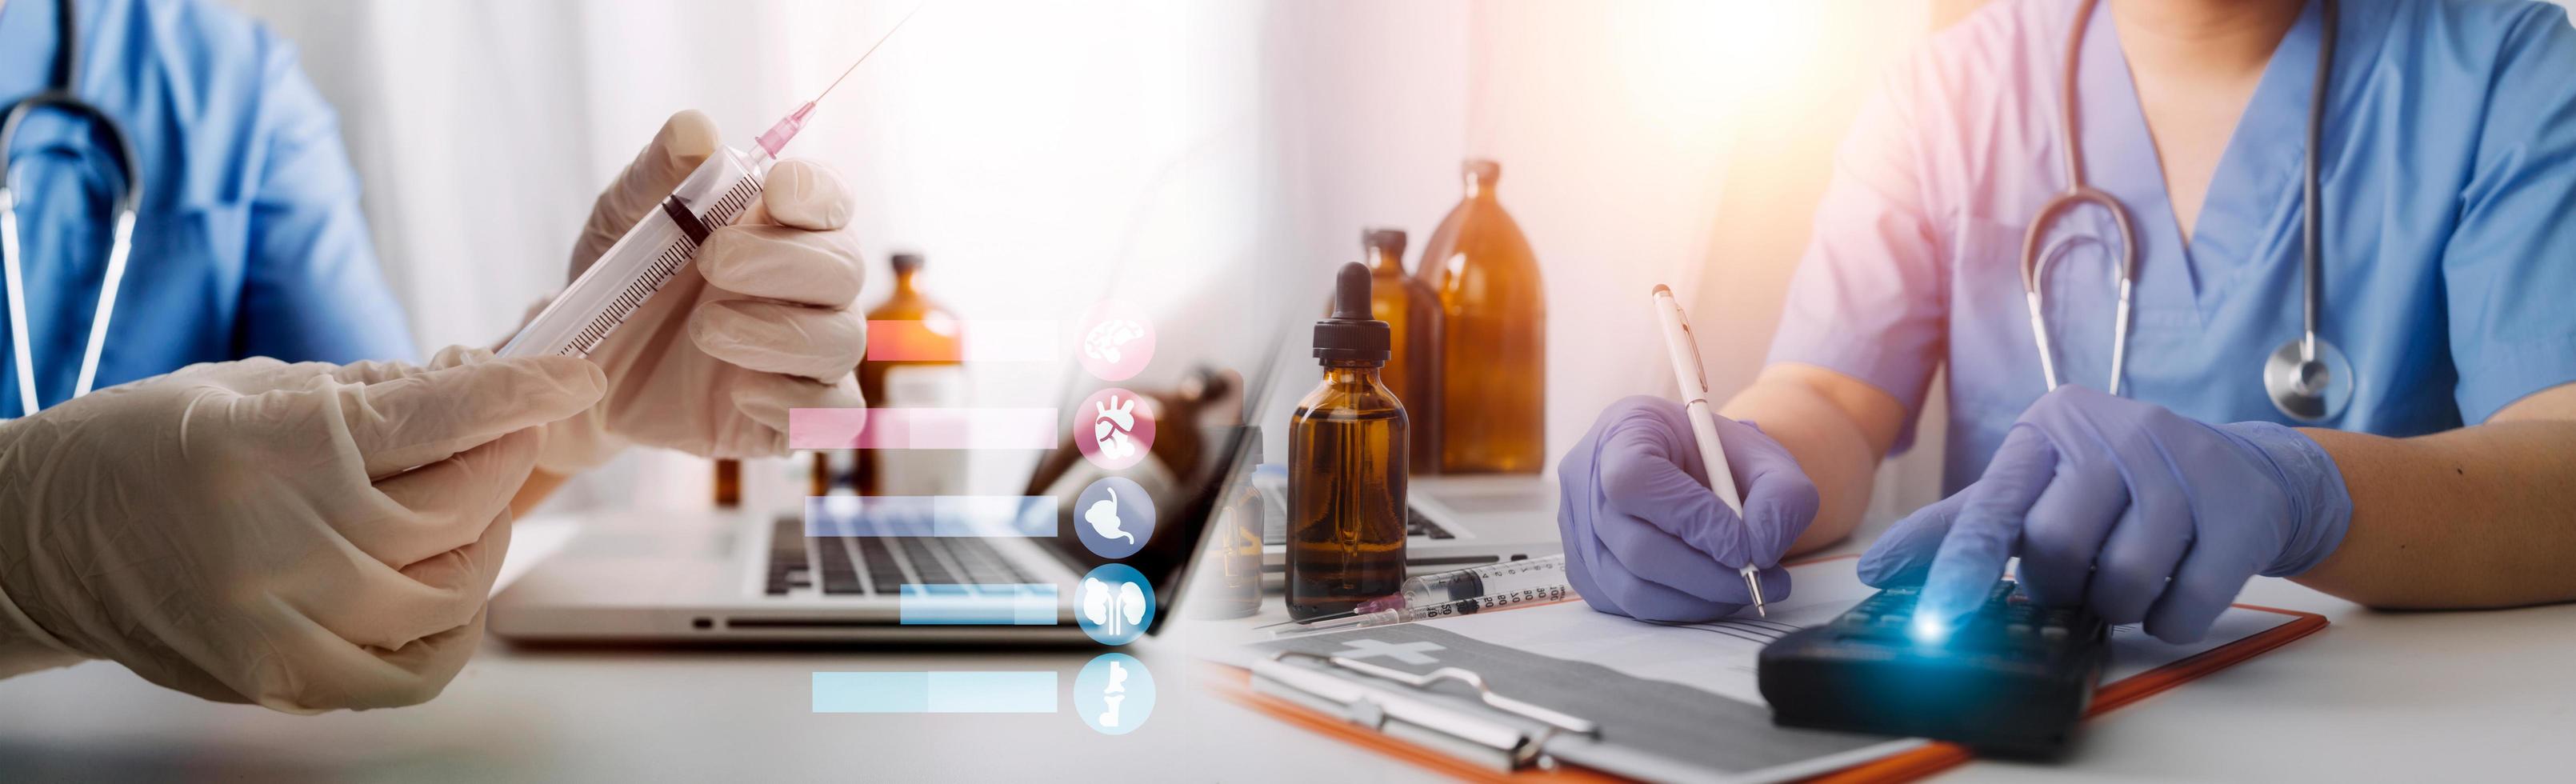 Double exposure of Doctor working with modern virtual screen interface, Healthcare And Medicine concept, Blurred background. photo